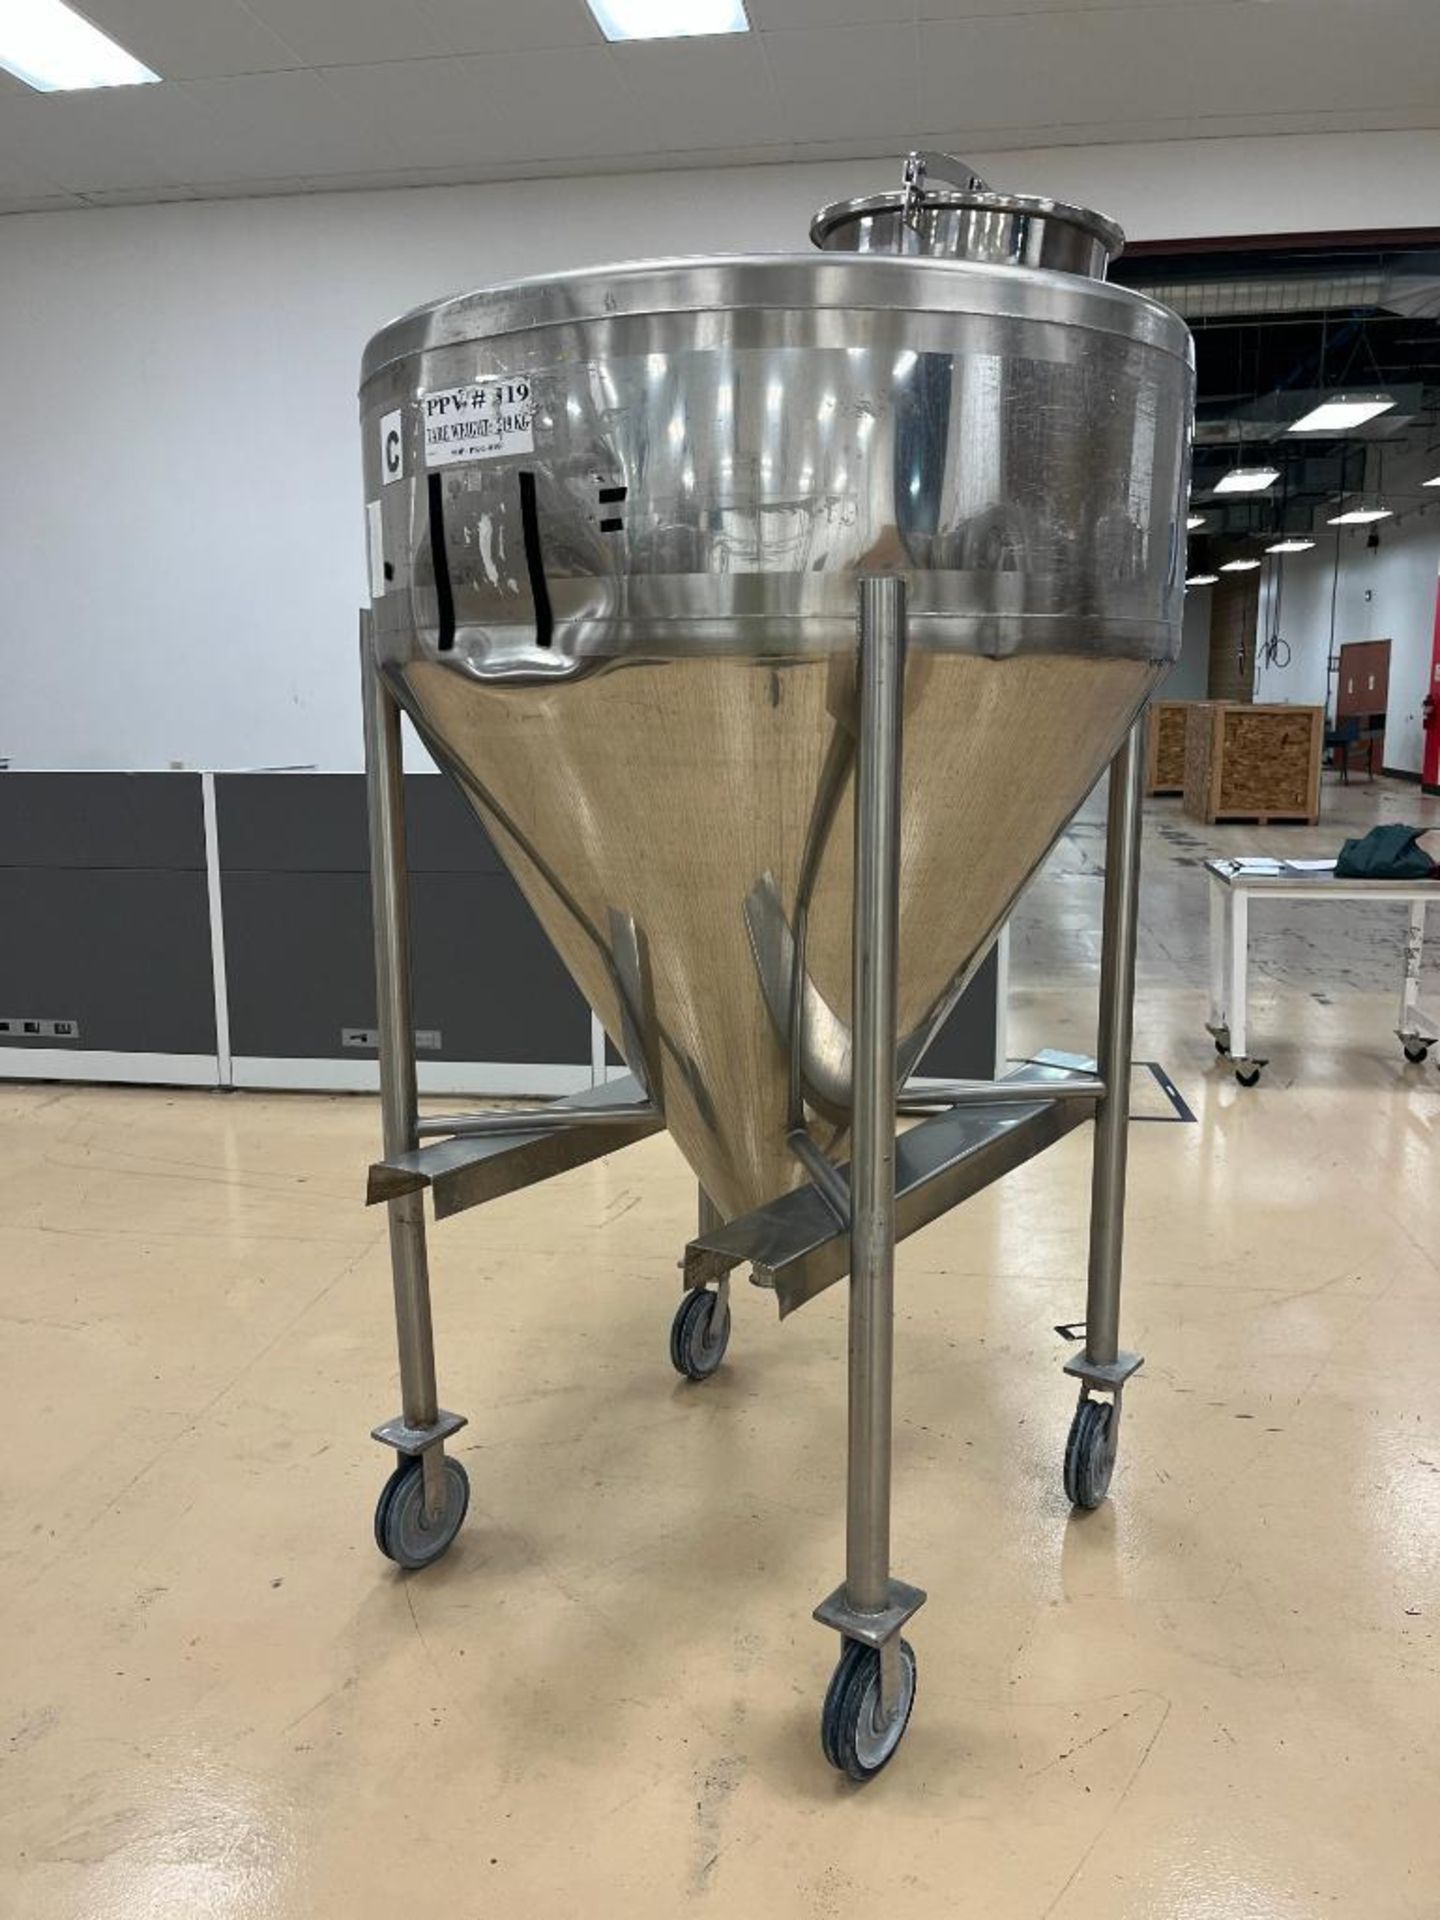 Zanchetta Portable Stainless Steel Tank, Aproximate 1000 Liter Dish Top Cone Bottom. Top Manway, Cen - Image 3 of 9